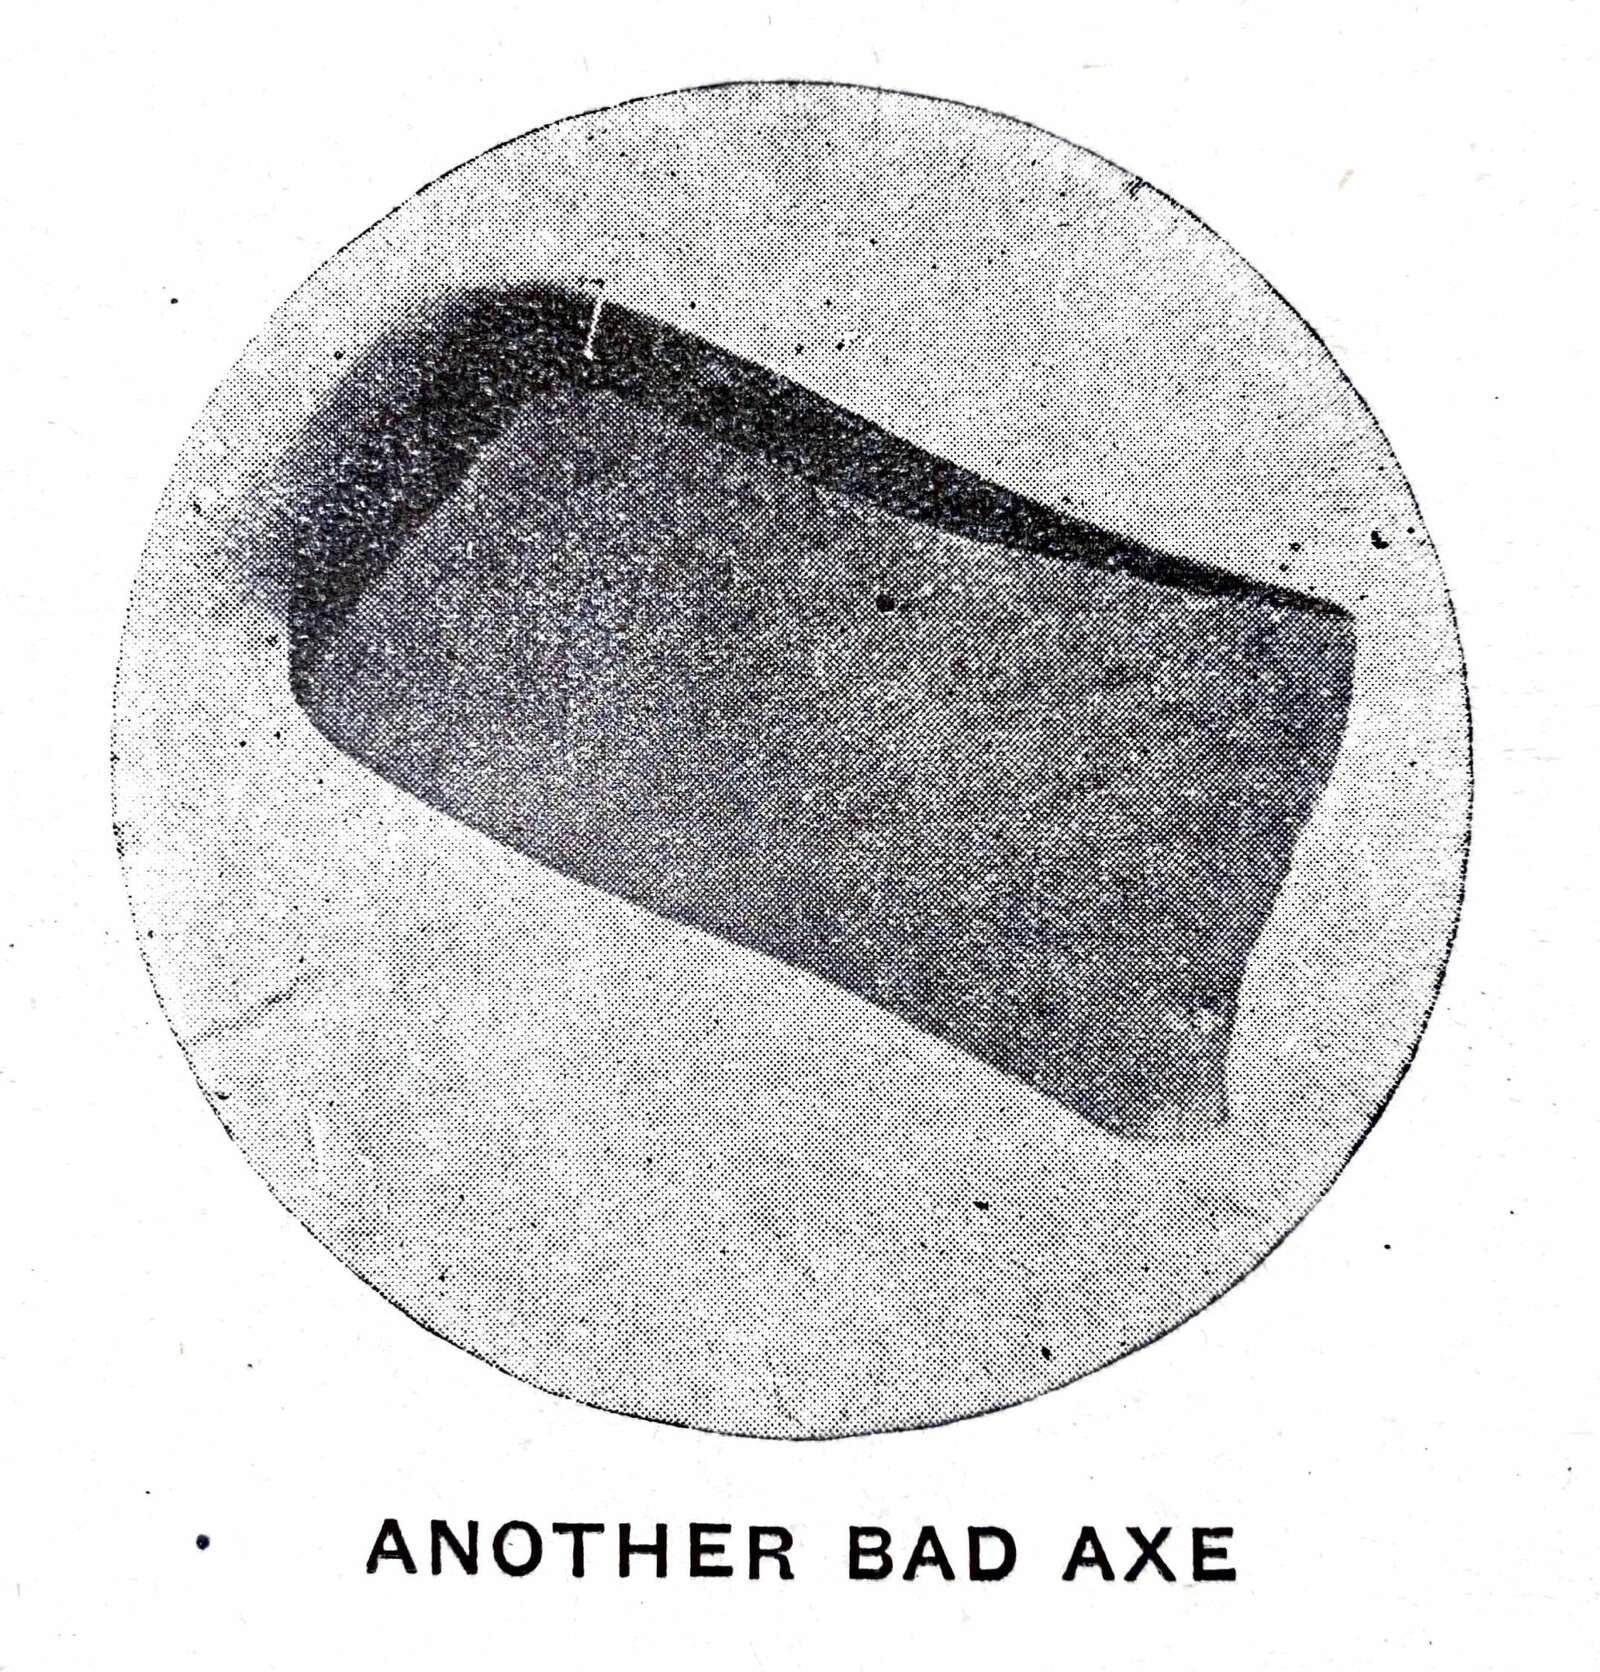 This image of an axe blade purported to be from the broken axe found by Rudolph Papst in 1861 was published in the Huron Daily Tribune's Bad Axe Golden Jubilee commemorative book in 1935.